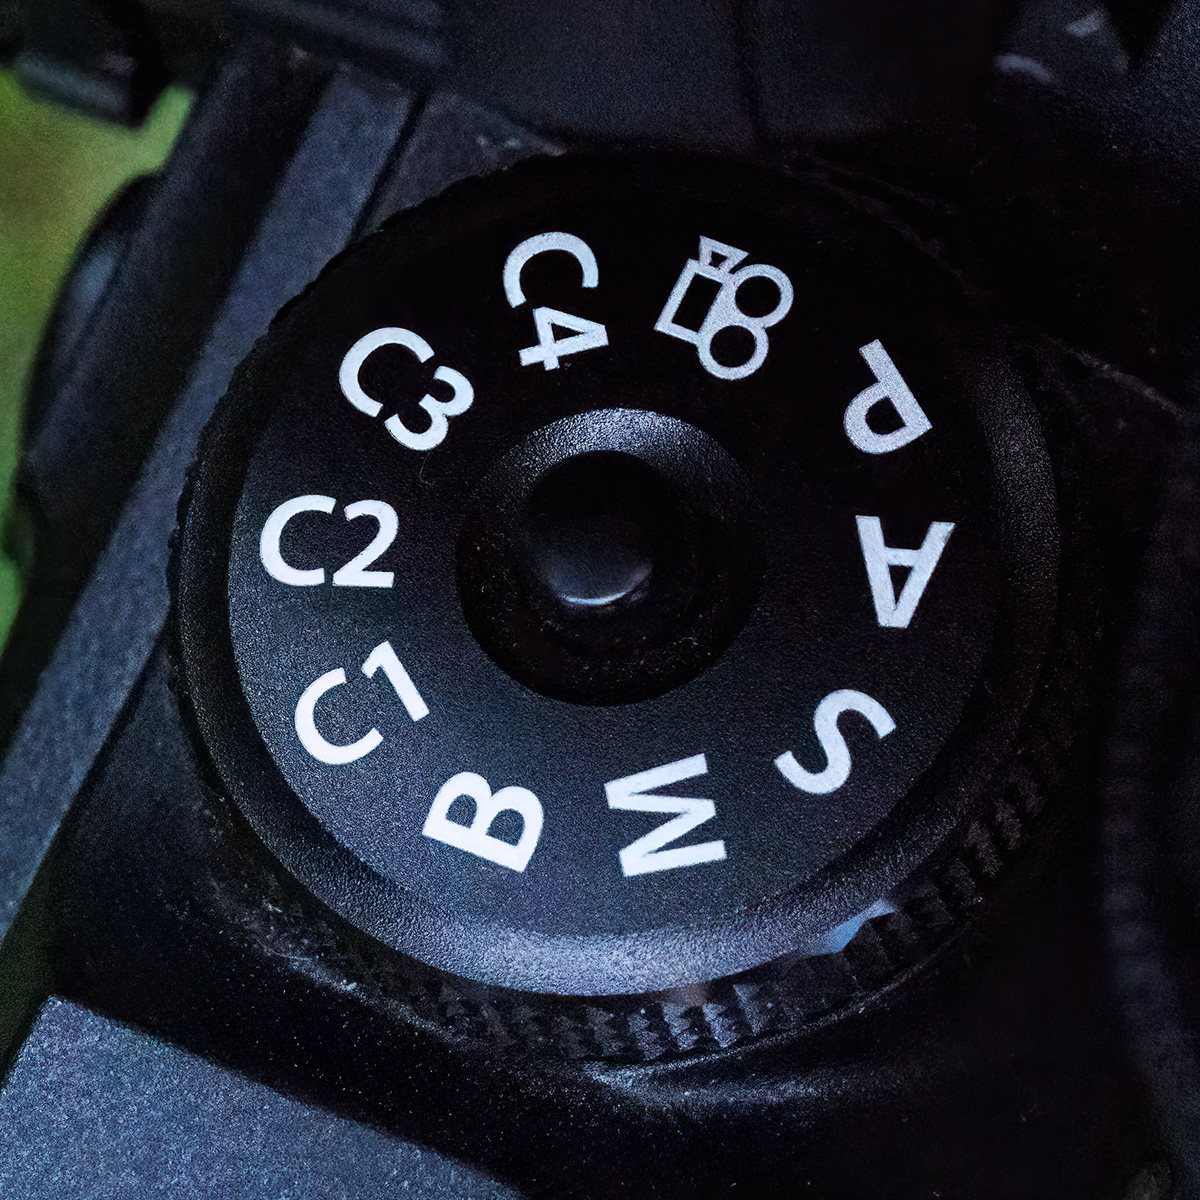 Custom modes and settings on the OM-1 for macro photography.